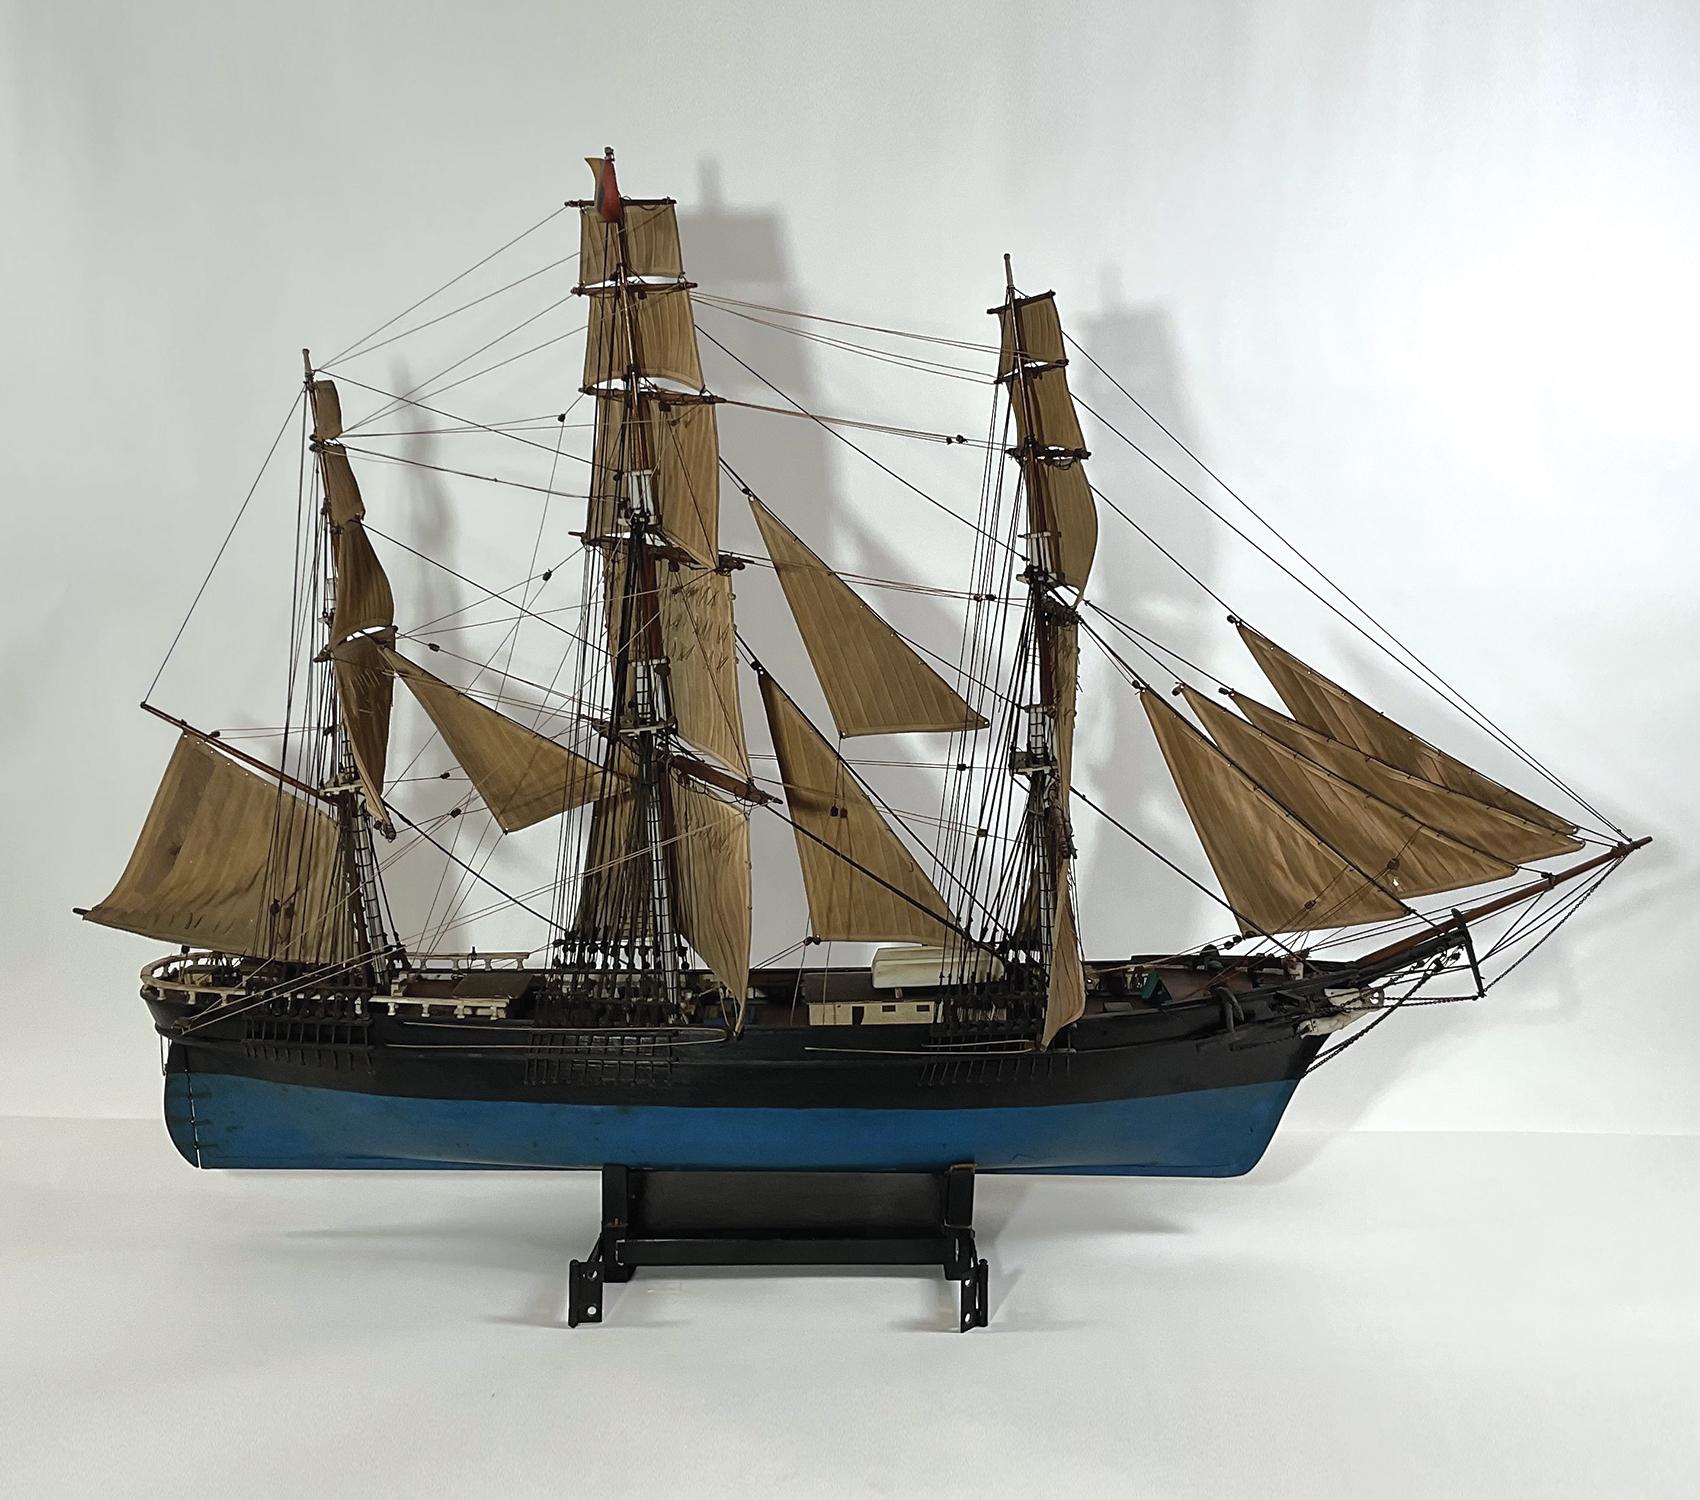 Antique early twentieth century model of the American clipper ship Flying Cloud by Thomas Rosenquist of Far Rockaway, New York. He has works in many museums. Famous builder from the past. With carved figurehead, anchors, capstans, etc.. Rigged with